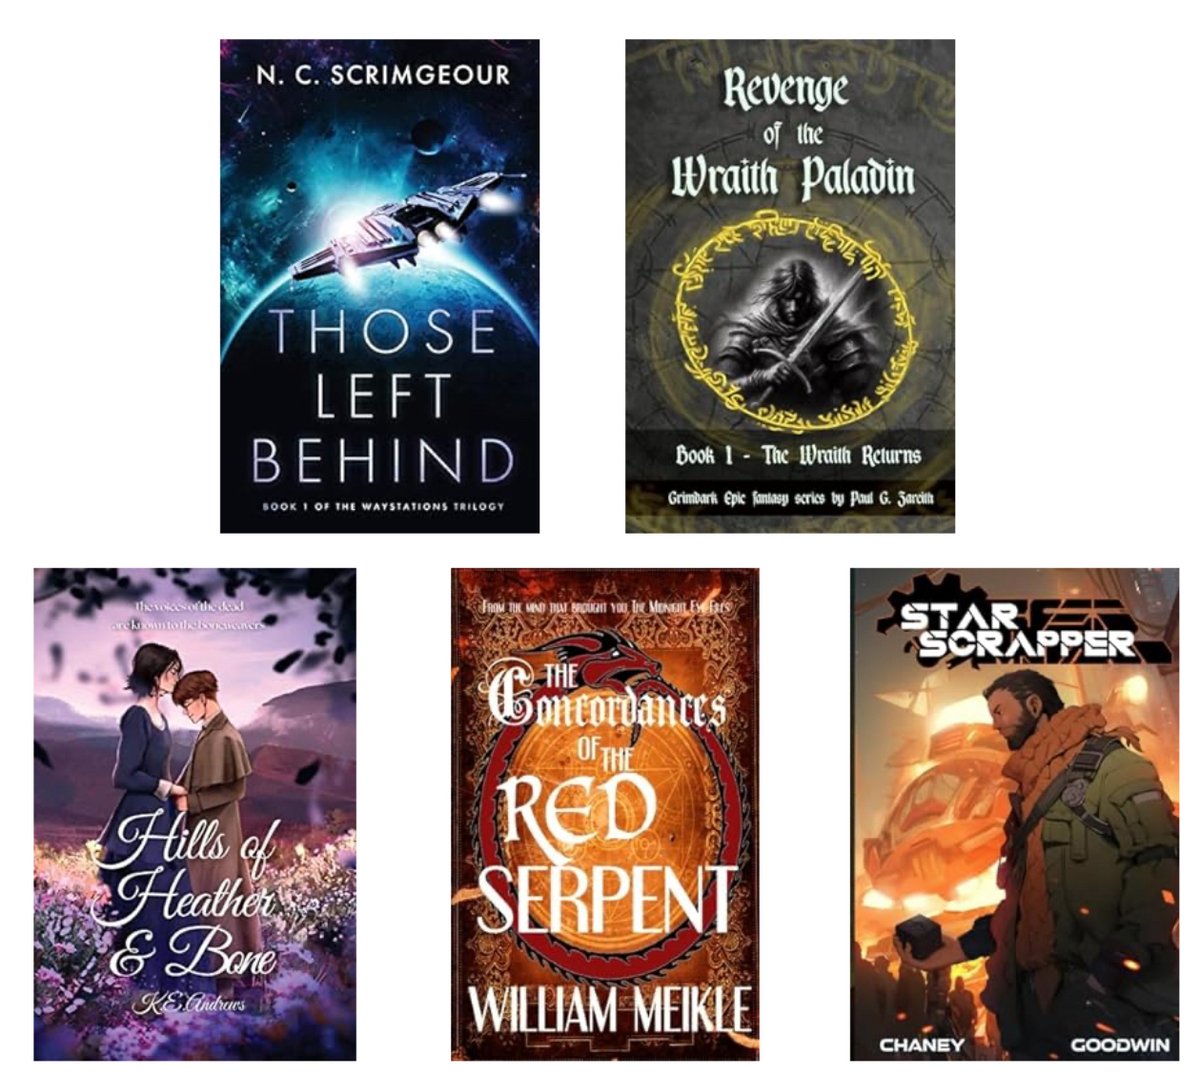 My #indiebook paperback order

Those Left Behind @scrimscribes 
Revenge of the Wraith Paladin @paulgzareith 
Hills of Heather and Bone @KEAndrews95 
The Concordances of the Red Serpent @williemeikle 
Star Scrapper by Chaney & Goodwin

Might repost group pic when the pbs arrive